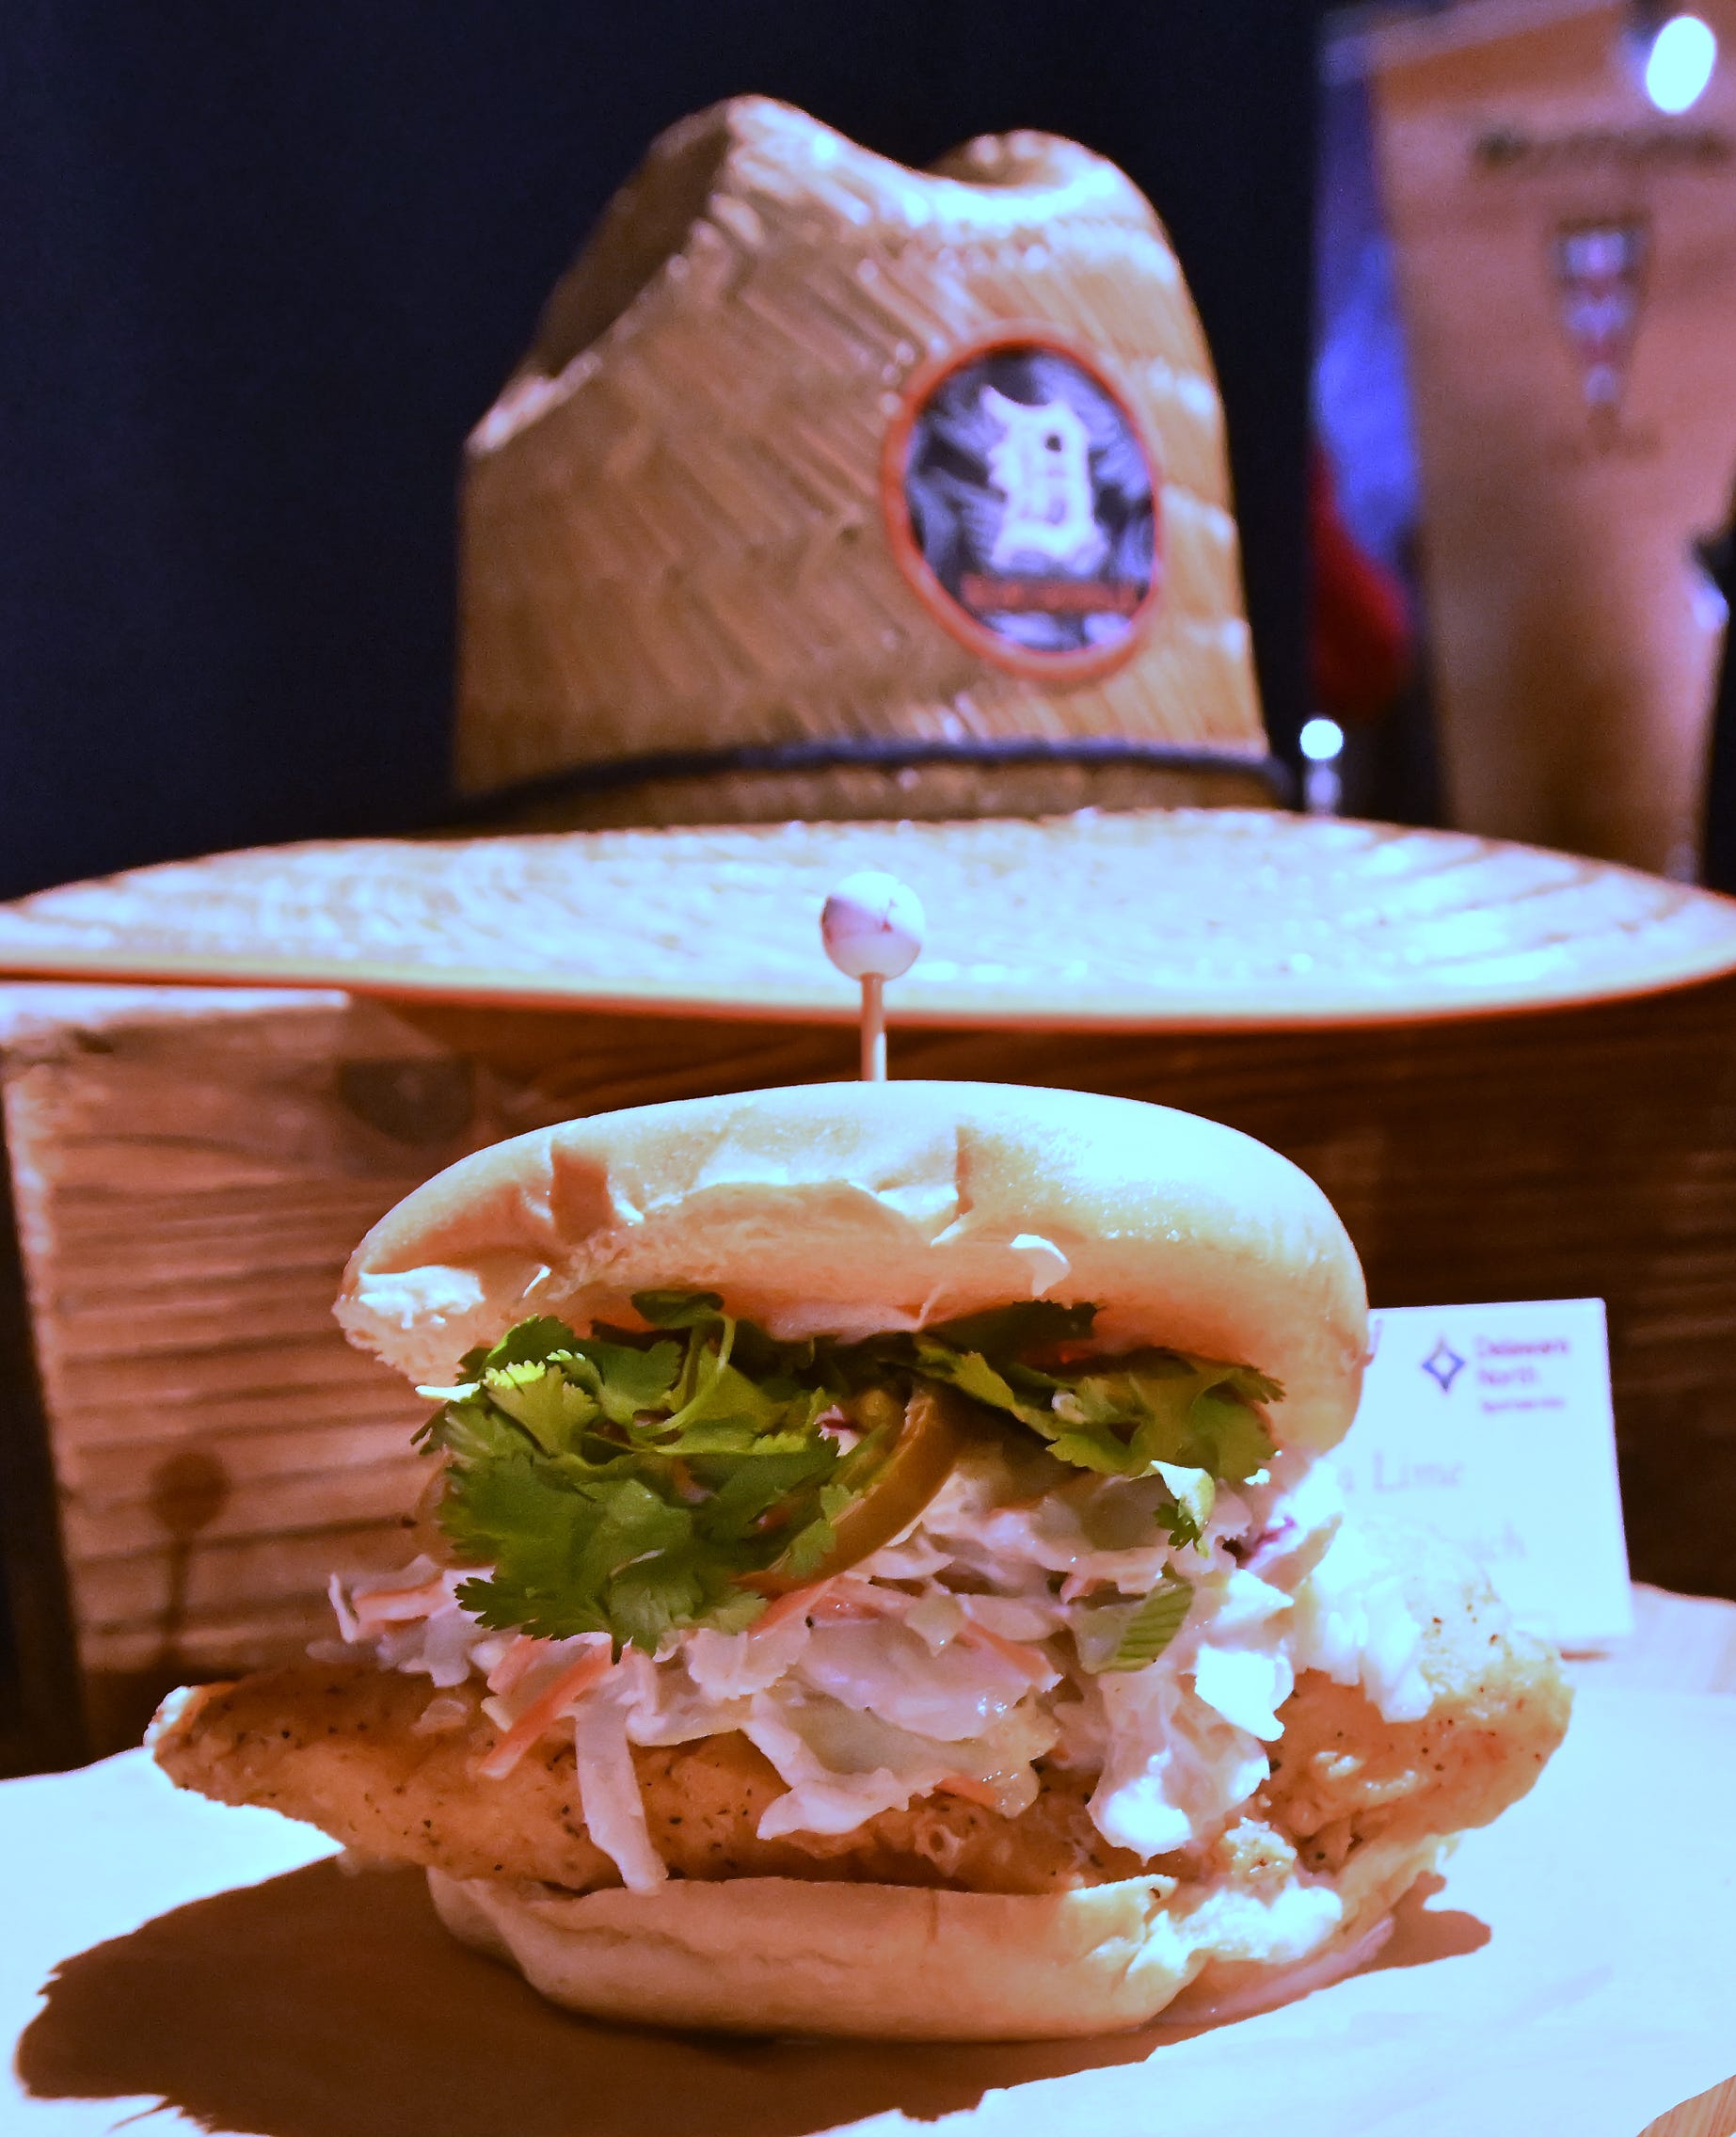 A tequila lime chicken sandwich, which pairs nicely with a margarita, during the Tigers "what's new" event at Comerica Park for the 2024 season.